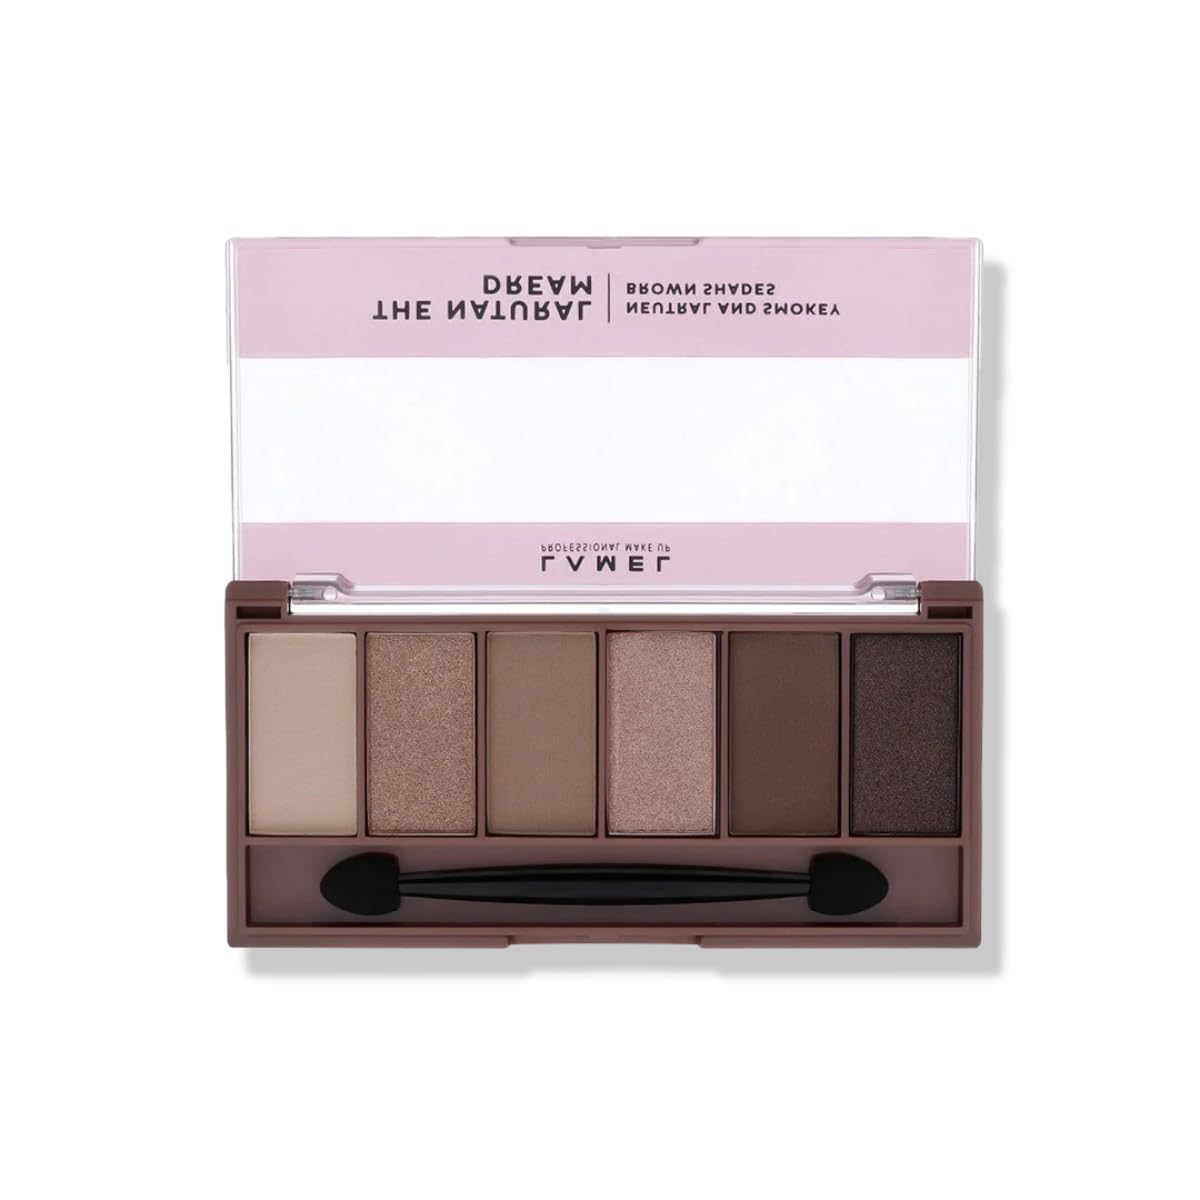 Lamel- The Natural Dream Eyeshadow Palette 403-Smoky Nude |Six versatile shades |Neutral tones & dazzling shimmers |Easily blendable |Crease-free formula |10.2gm